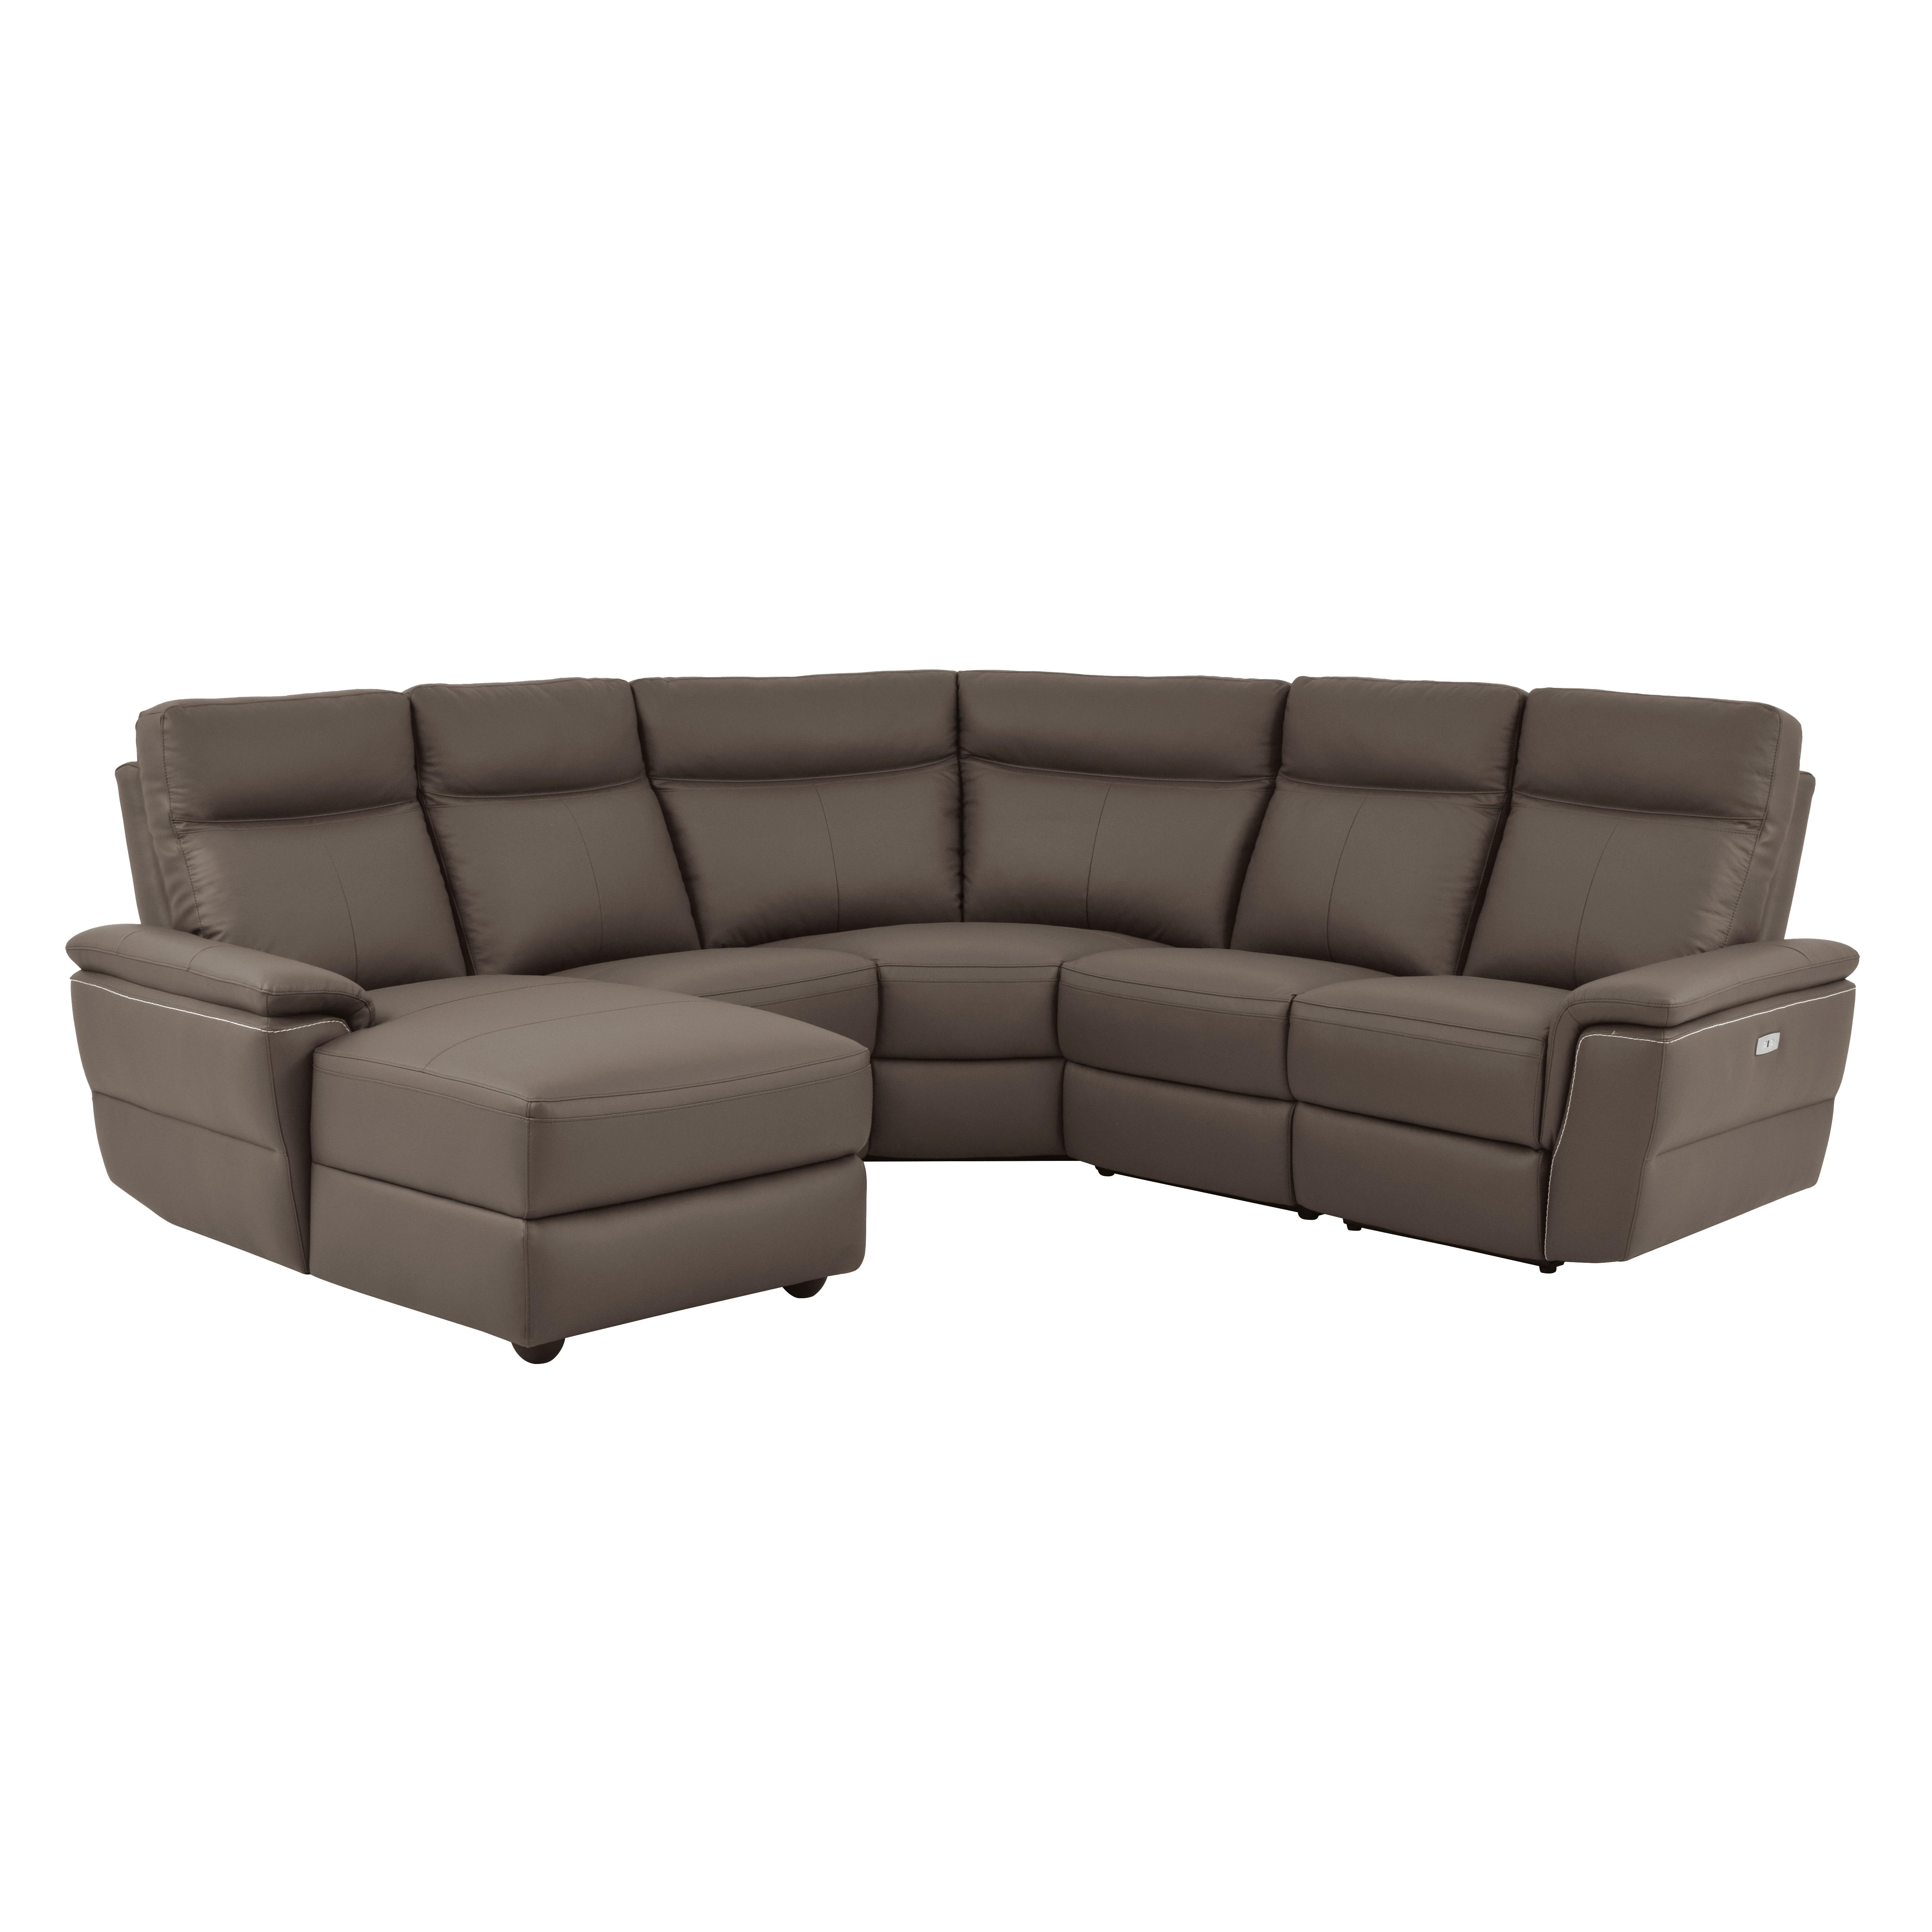 

    
Contemporary Raisin Leather 5-Piece LSF Power Reclining Sectional Homelegance 8308*5A1PW Olympia
